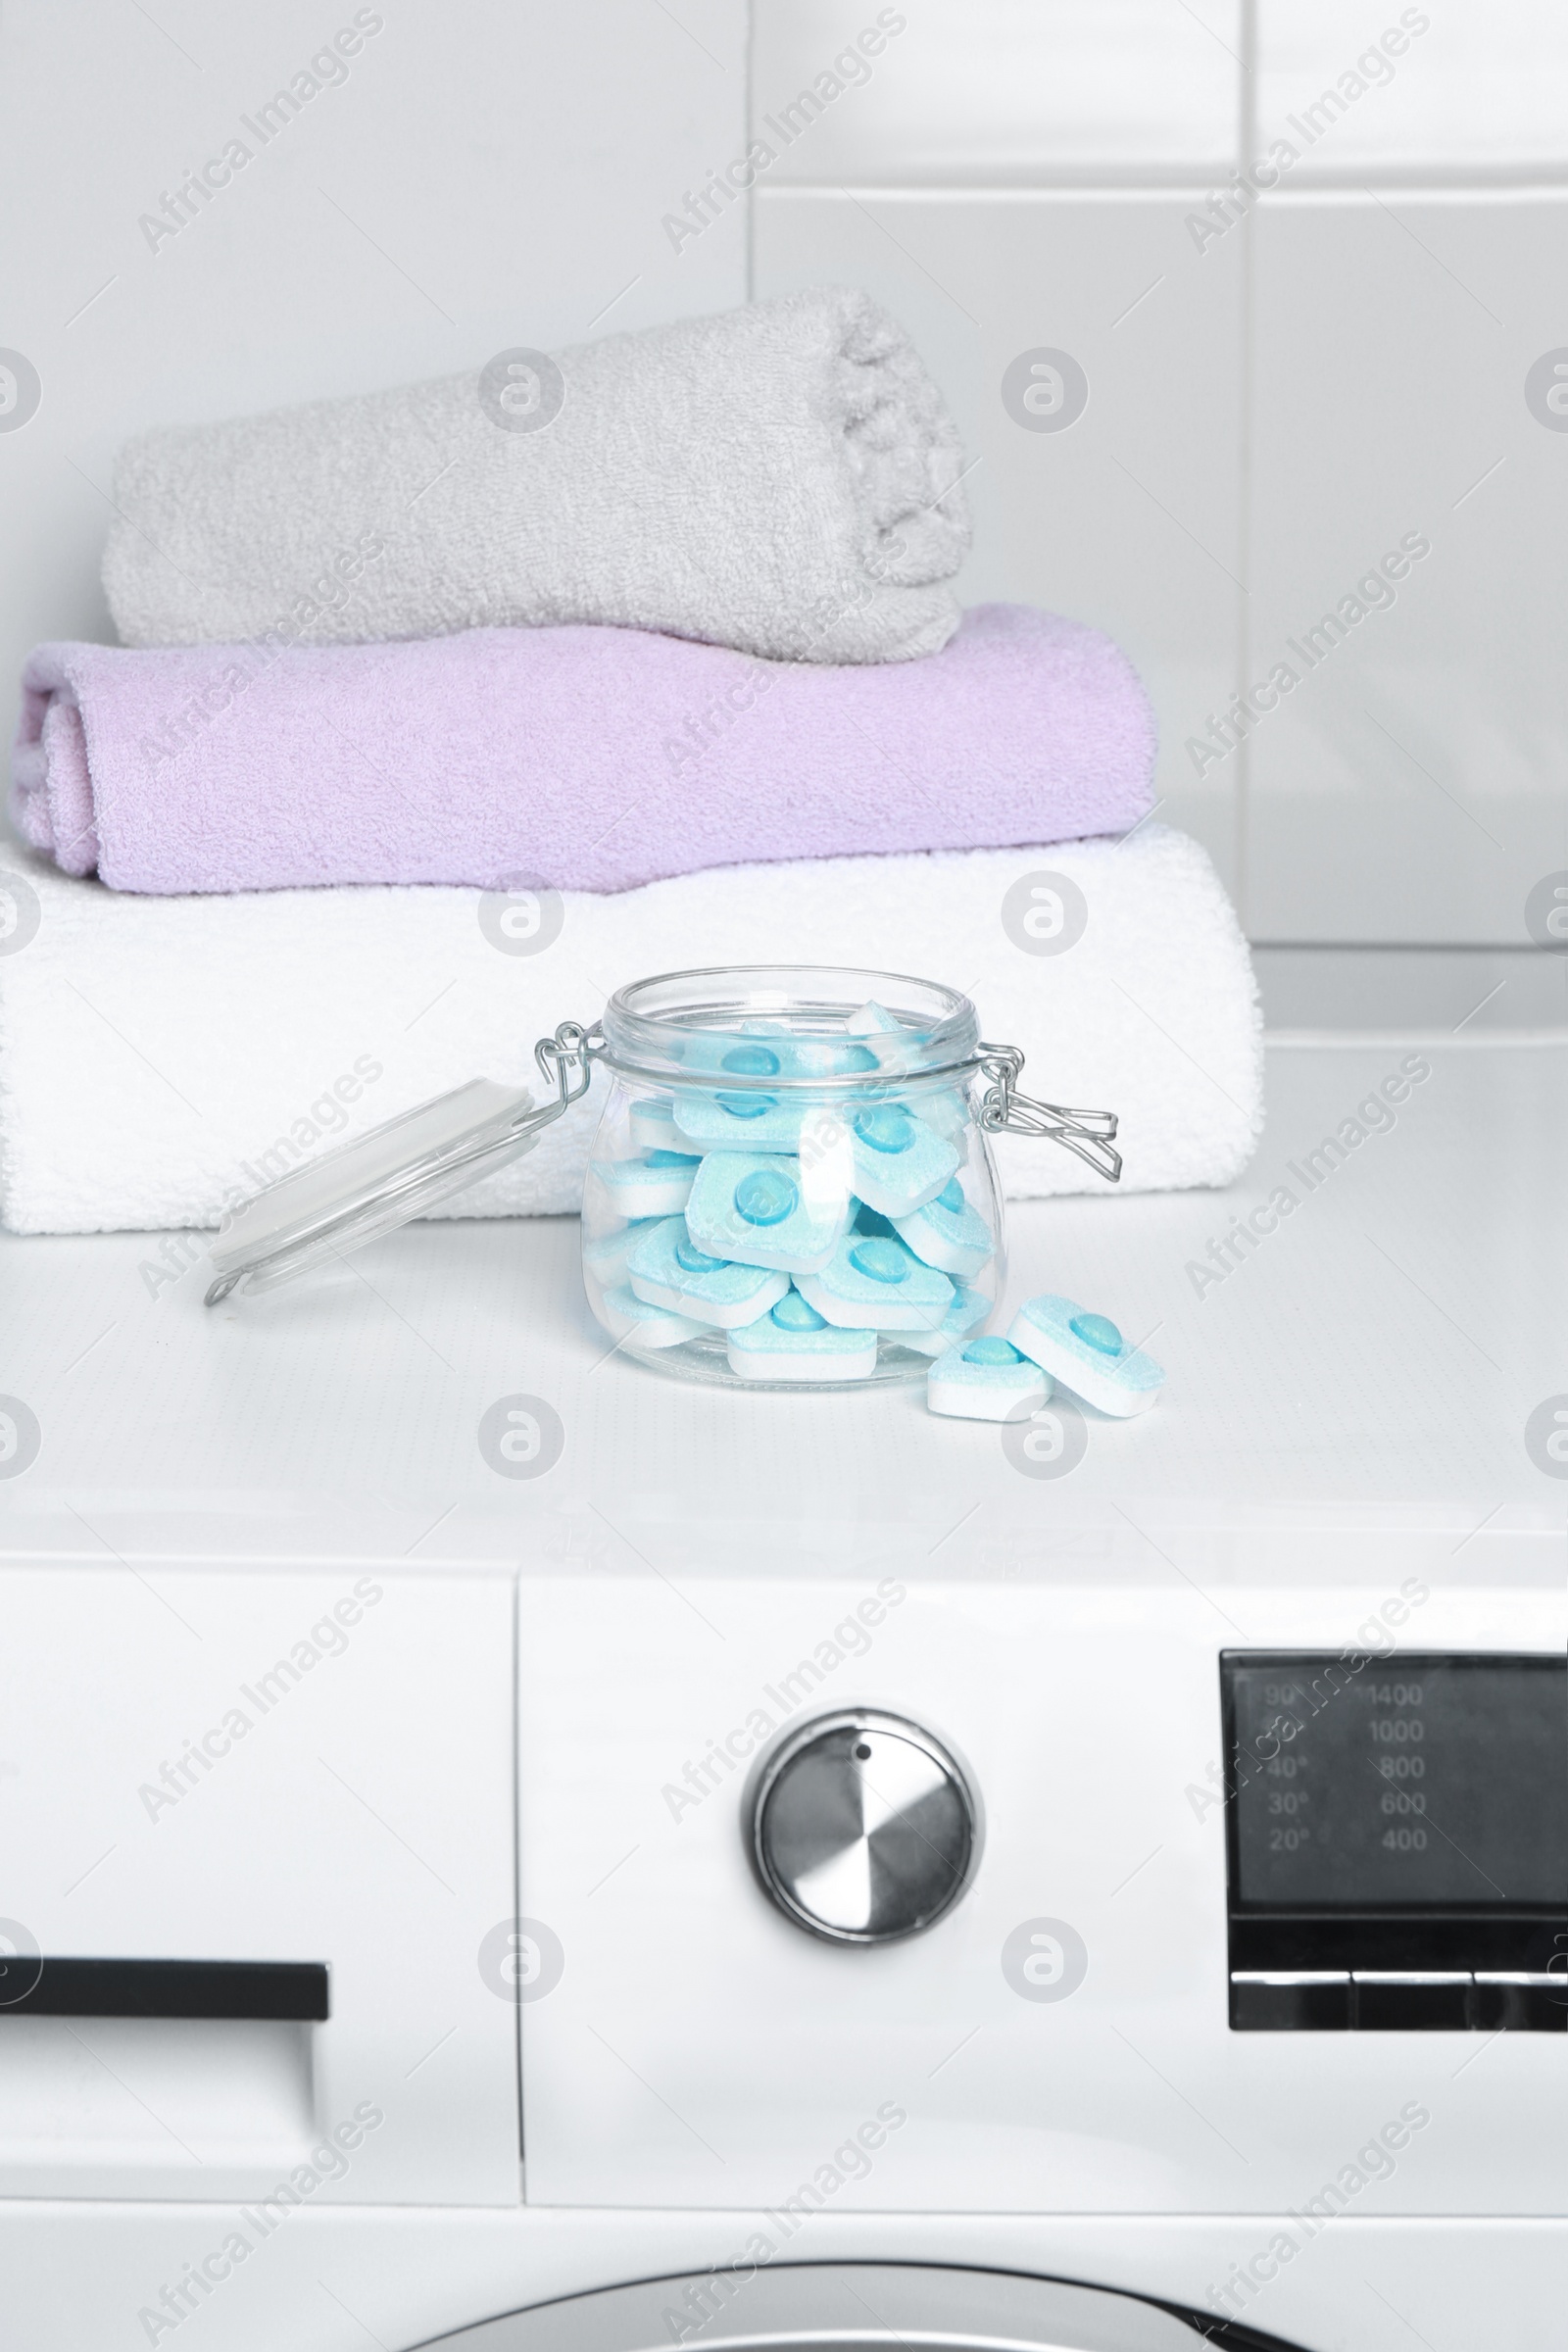 Photo of Jar with water softener tablets near stacked towels on washing machine